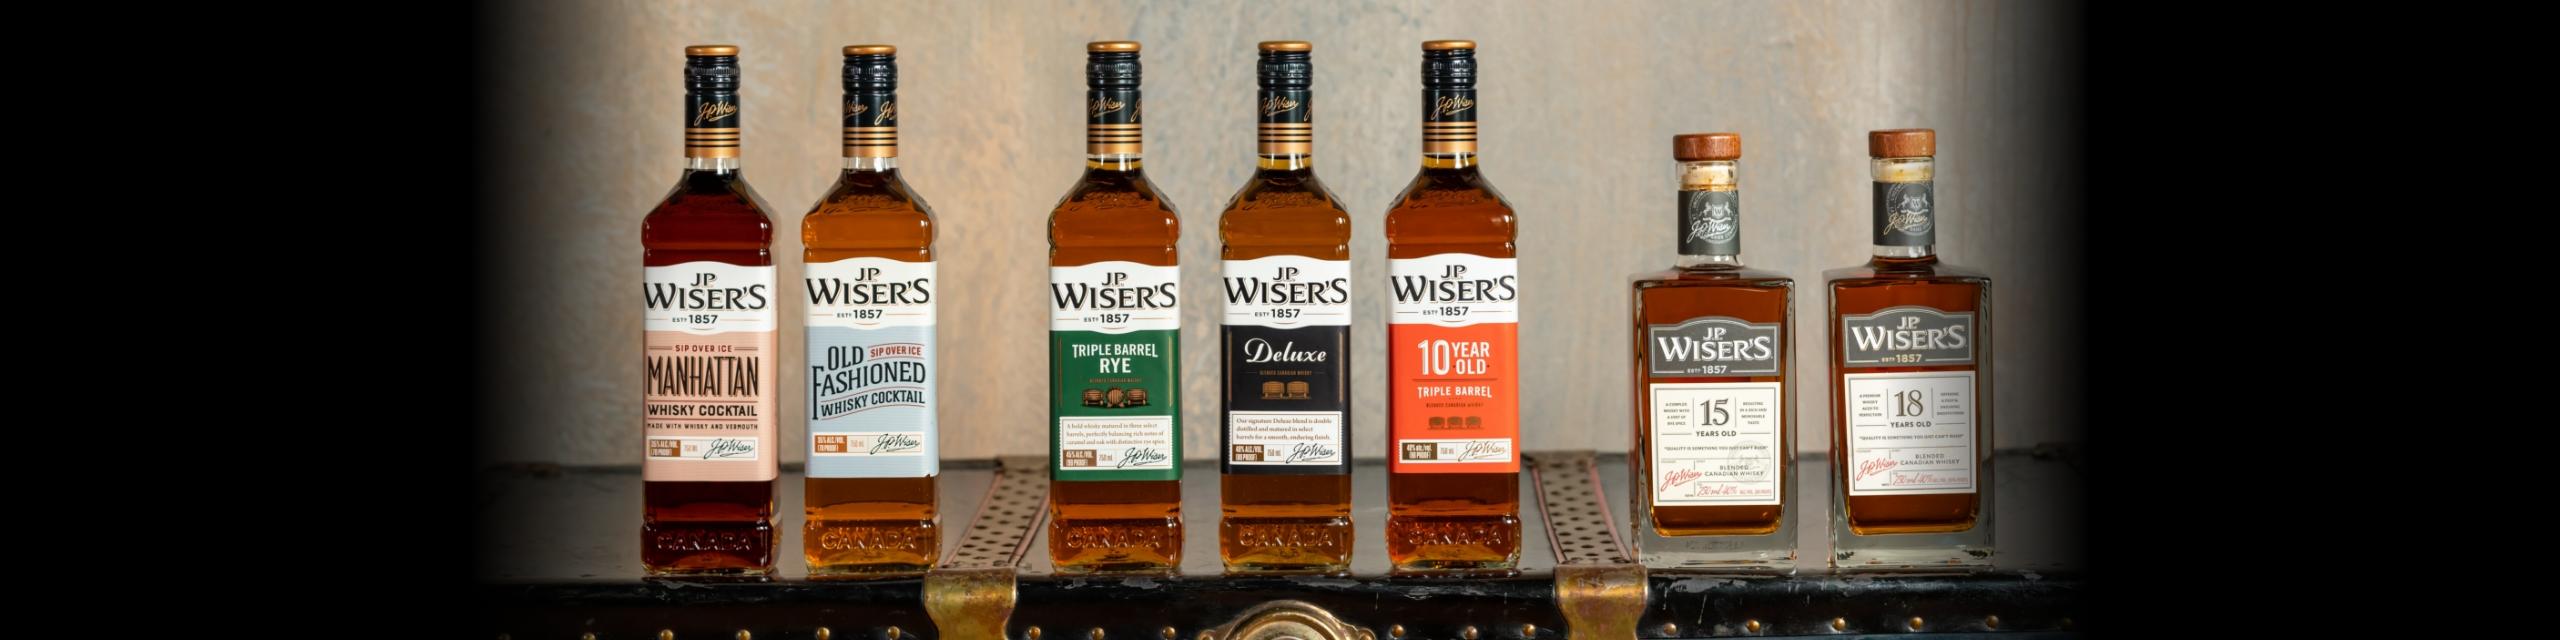 Buy JP Wiser's online now from your nearby liquor store via Minibar Delivery. 